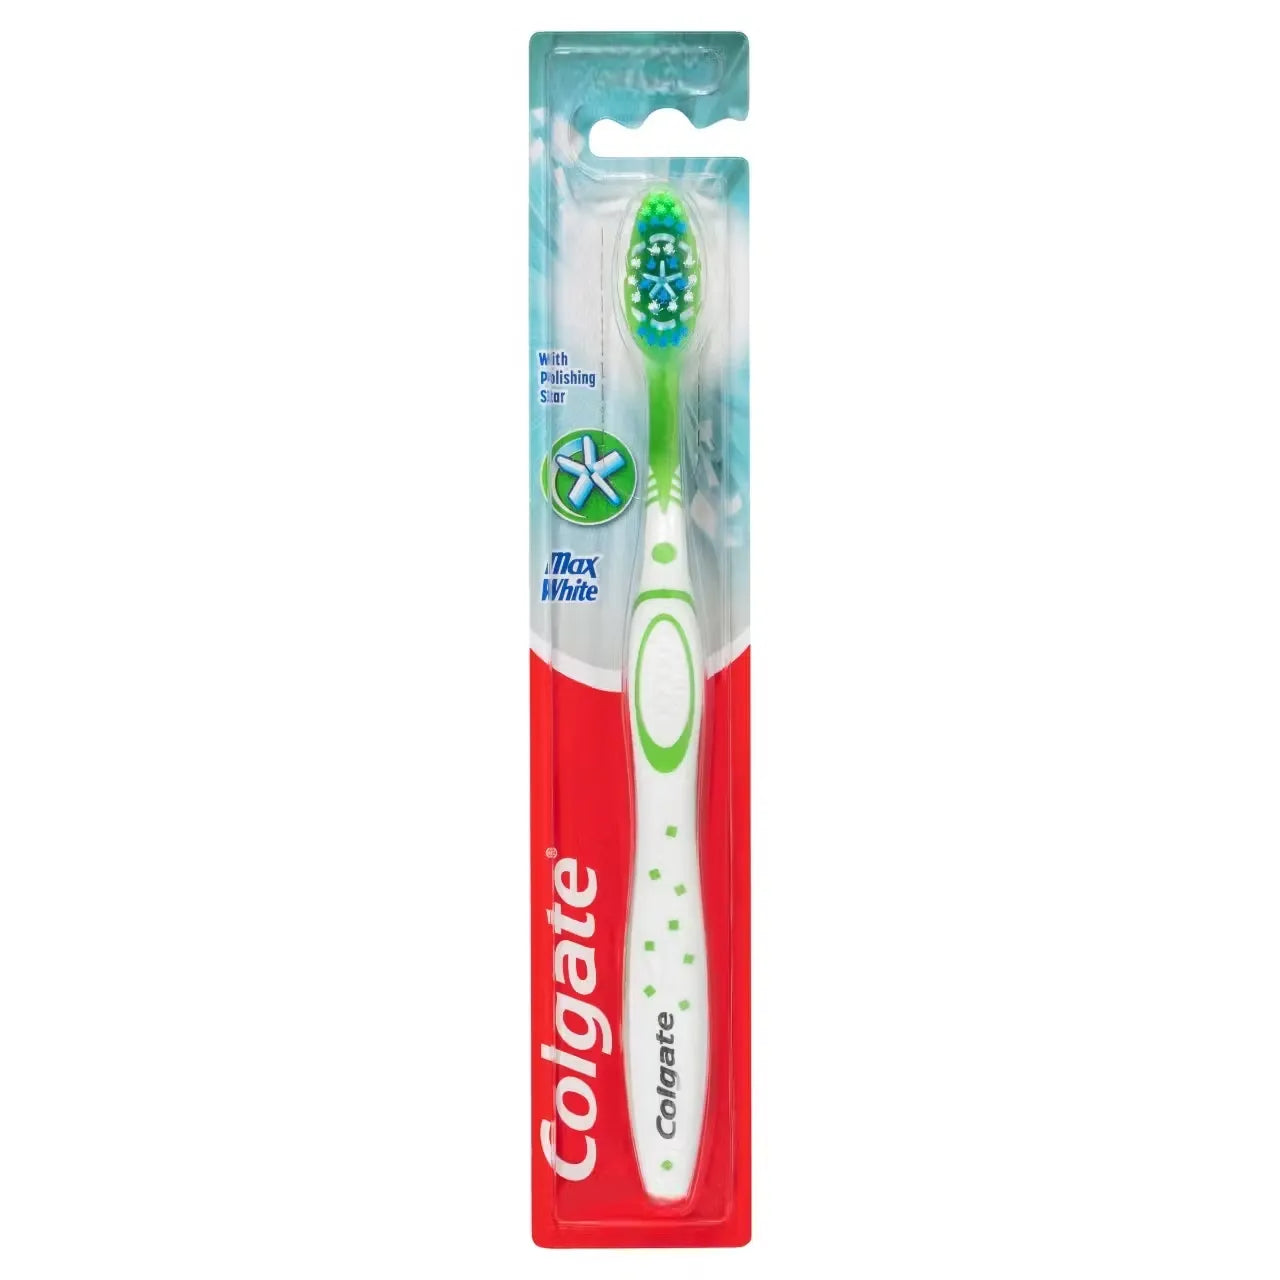 Colgate Max White toothbrush with green bristles and star-shaped polishing head.